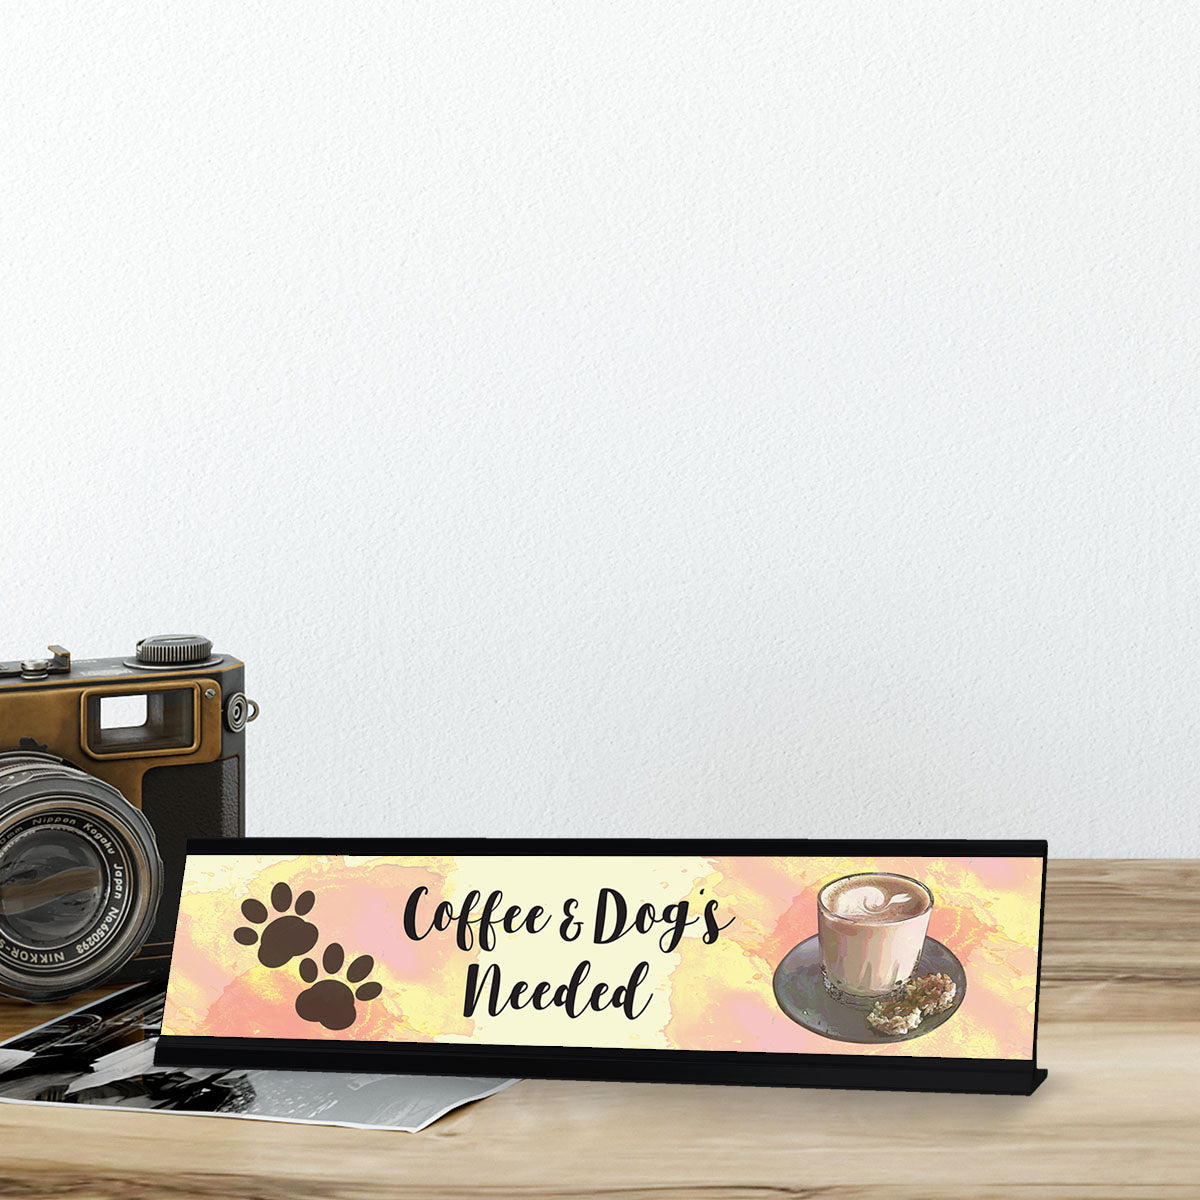 Coffee and Dog's Needed, Designer Desk Sign (2 x 8")